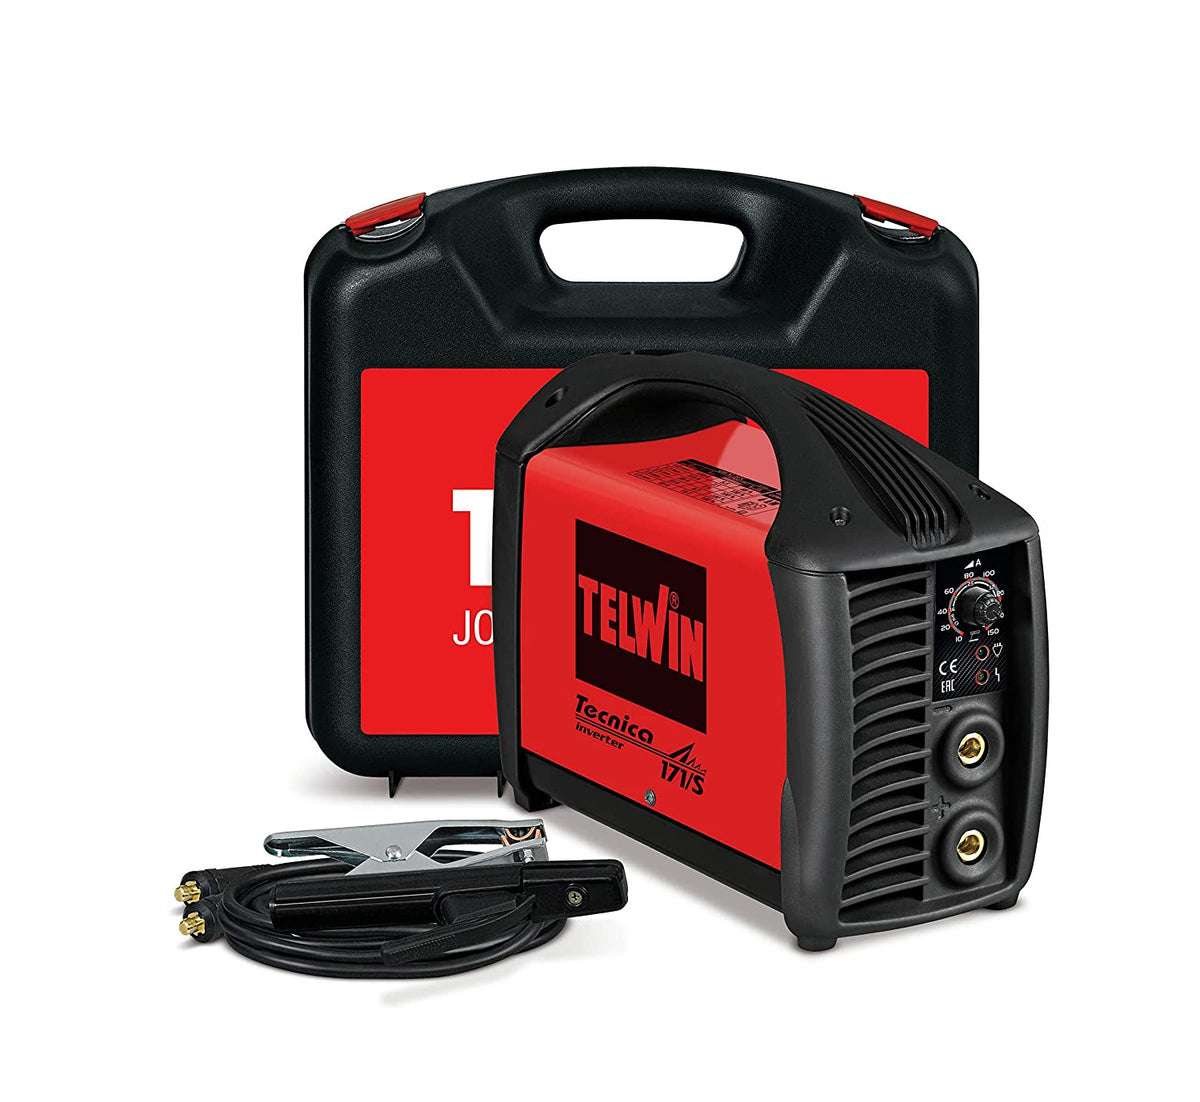 Tecnica 171/S 230V Inverter Welding Machine with Carry Case - Telwin - 816203